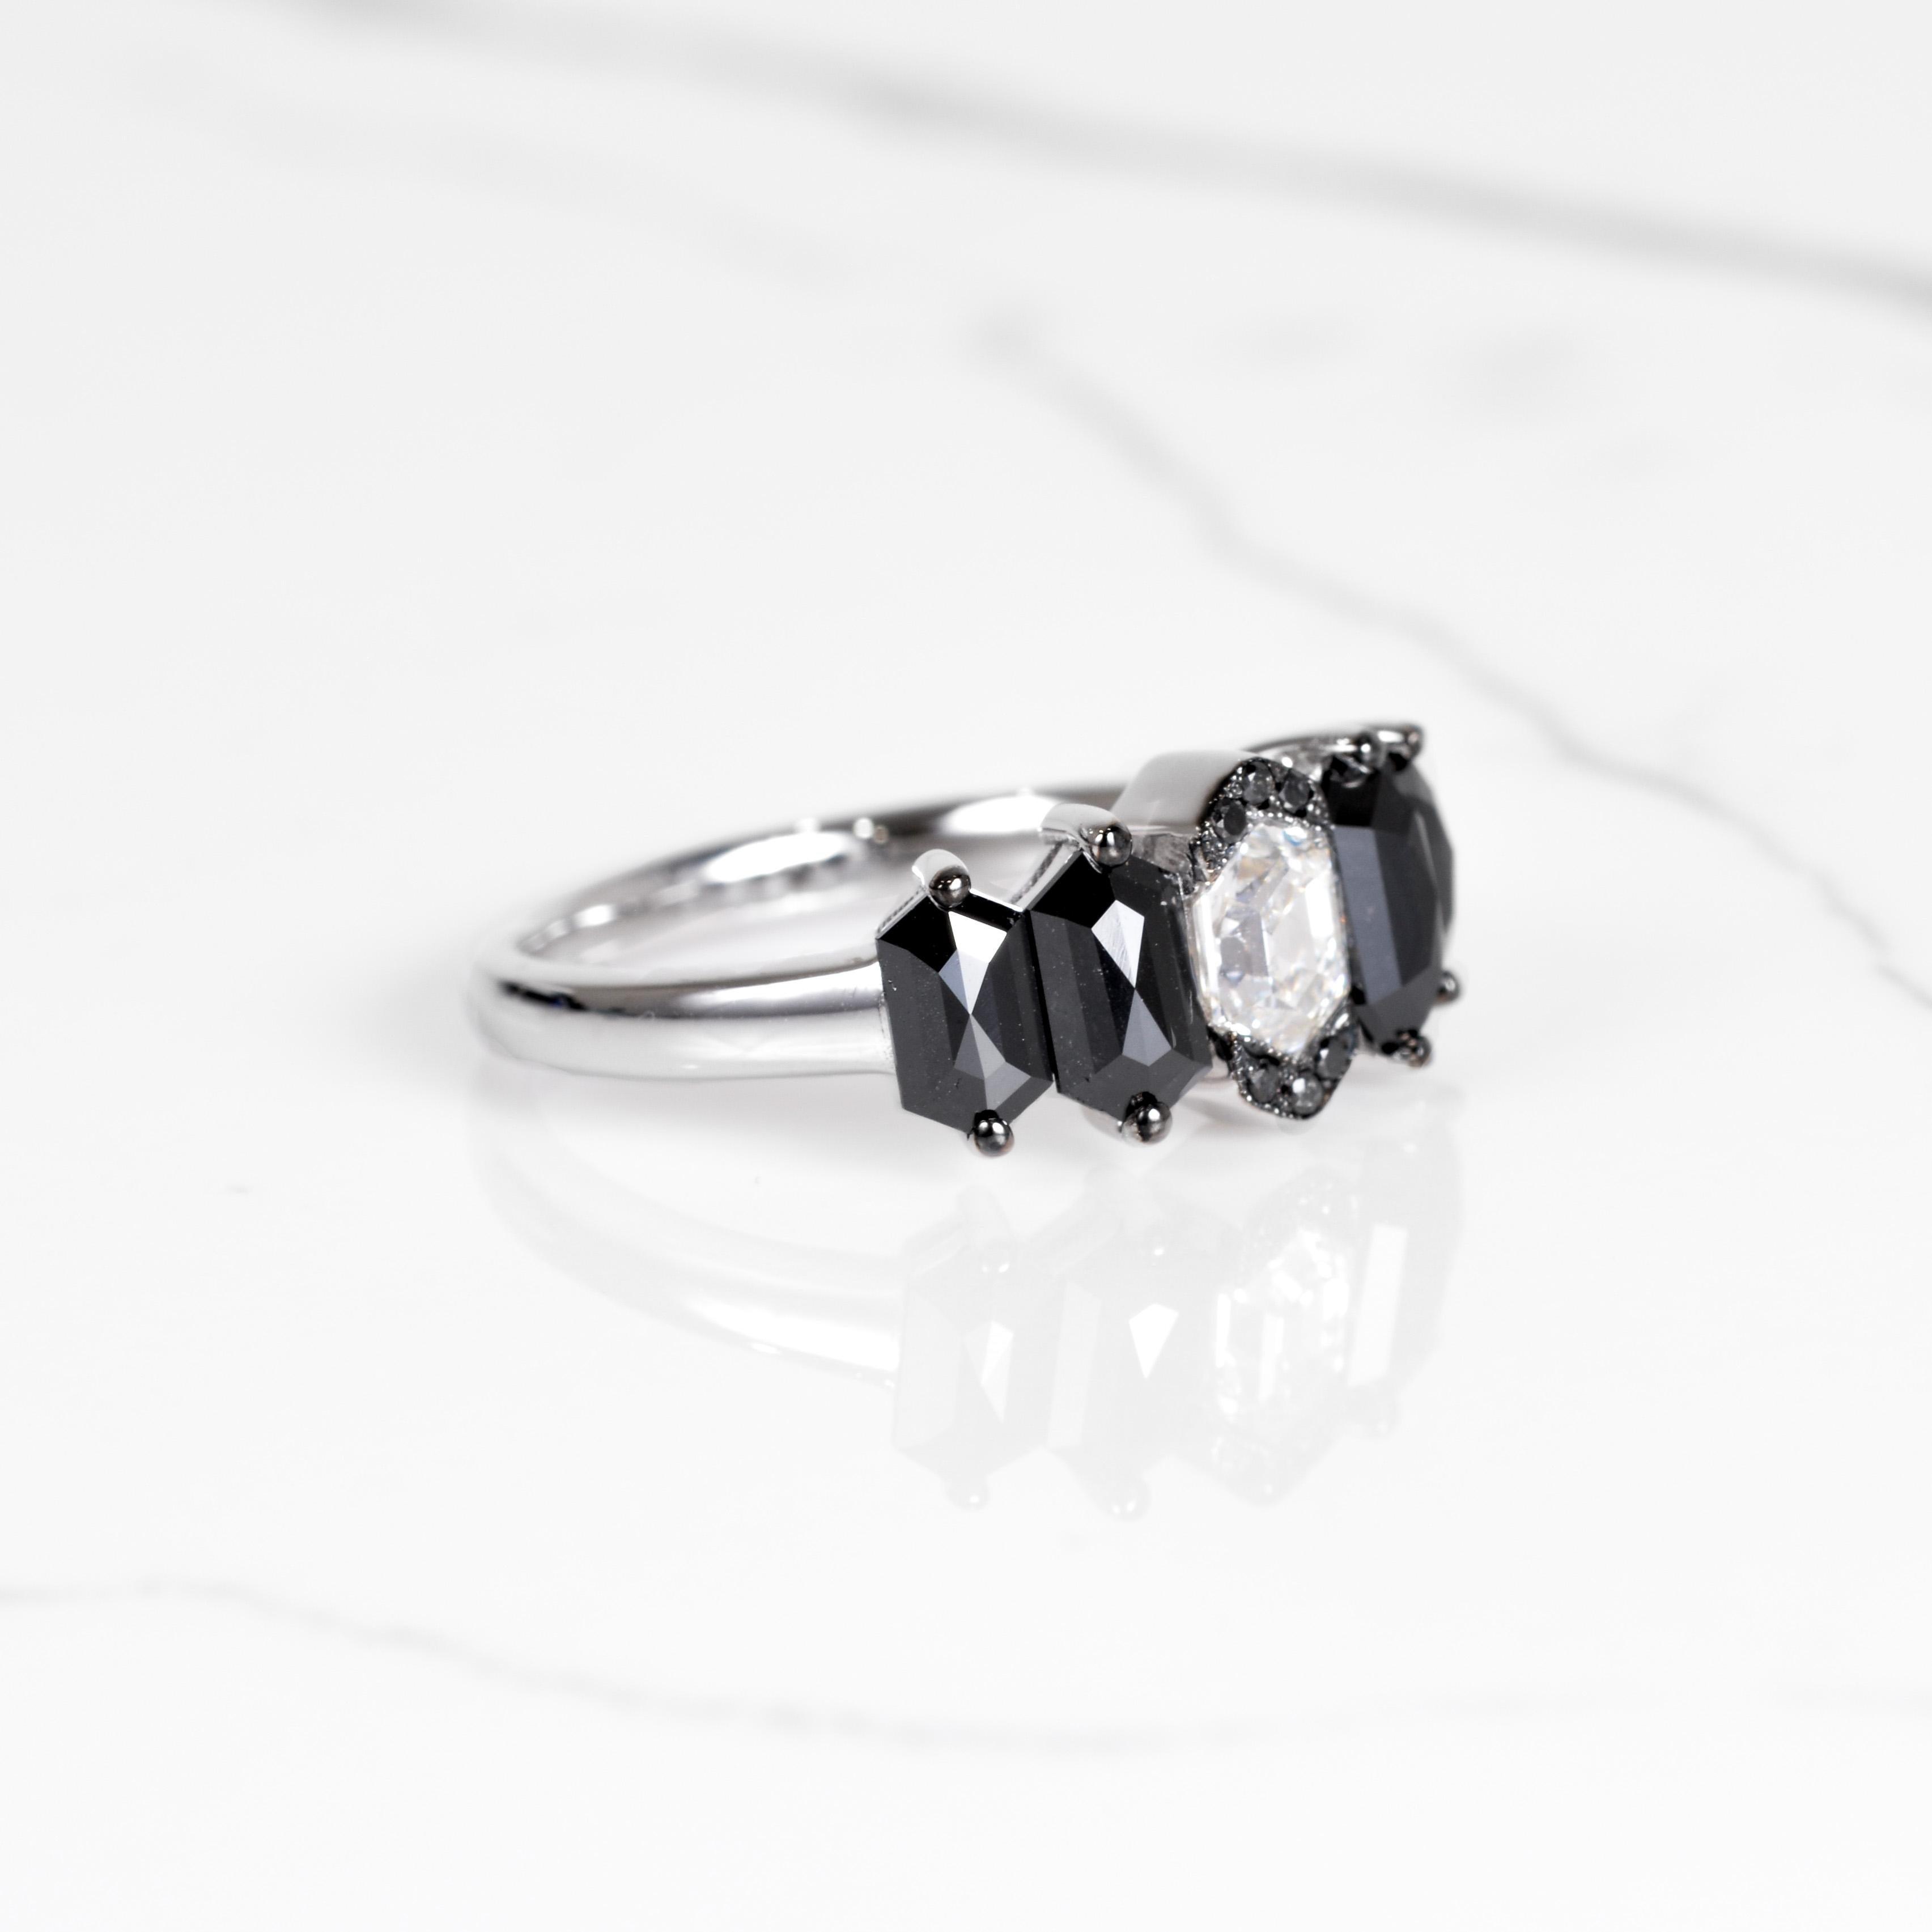 Black and white diamonds sure do go great together! The diamonds in this ring are hexagon cut diamonds which make for a unique and stunning look. The elongated hexagon cut black diamonds total 2 carats and surround a beautiful hexagon cut white